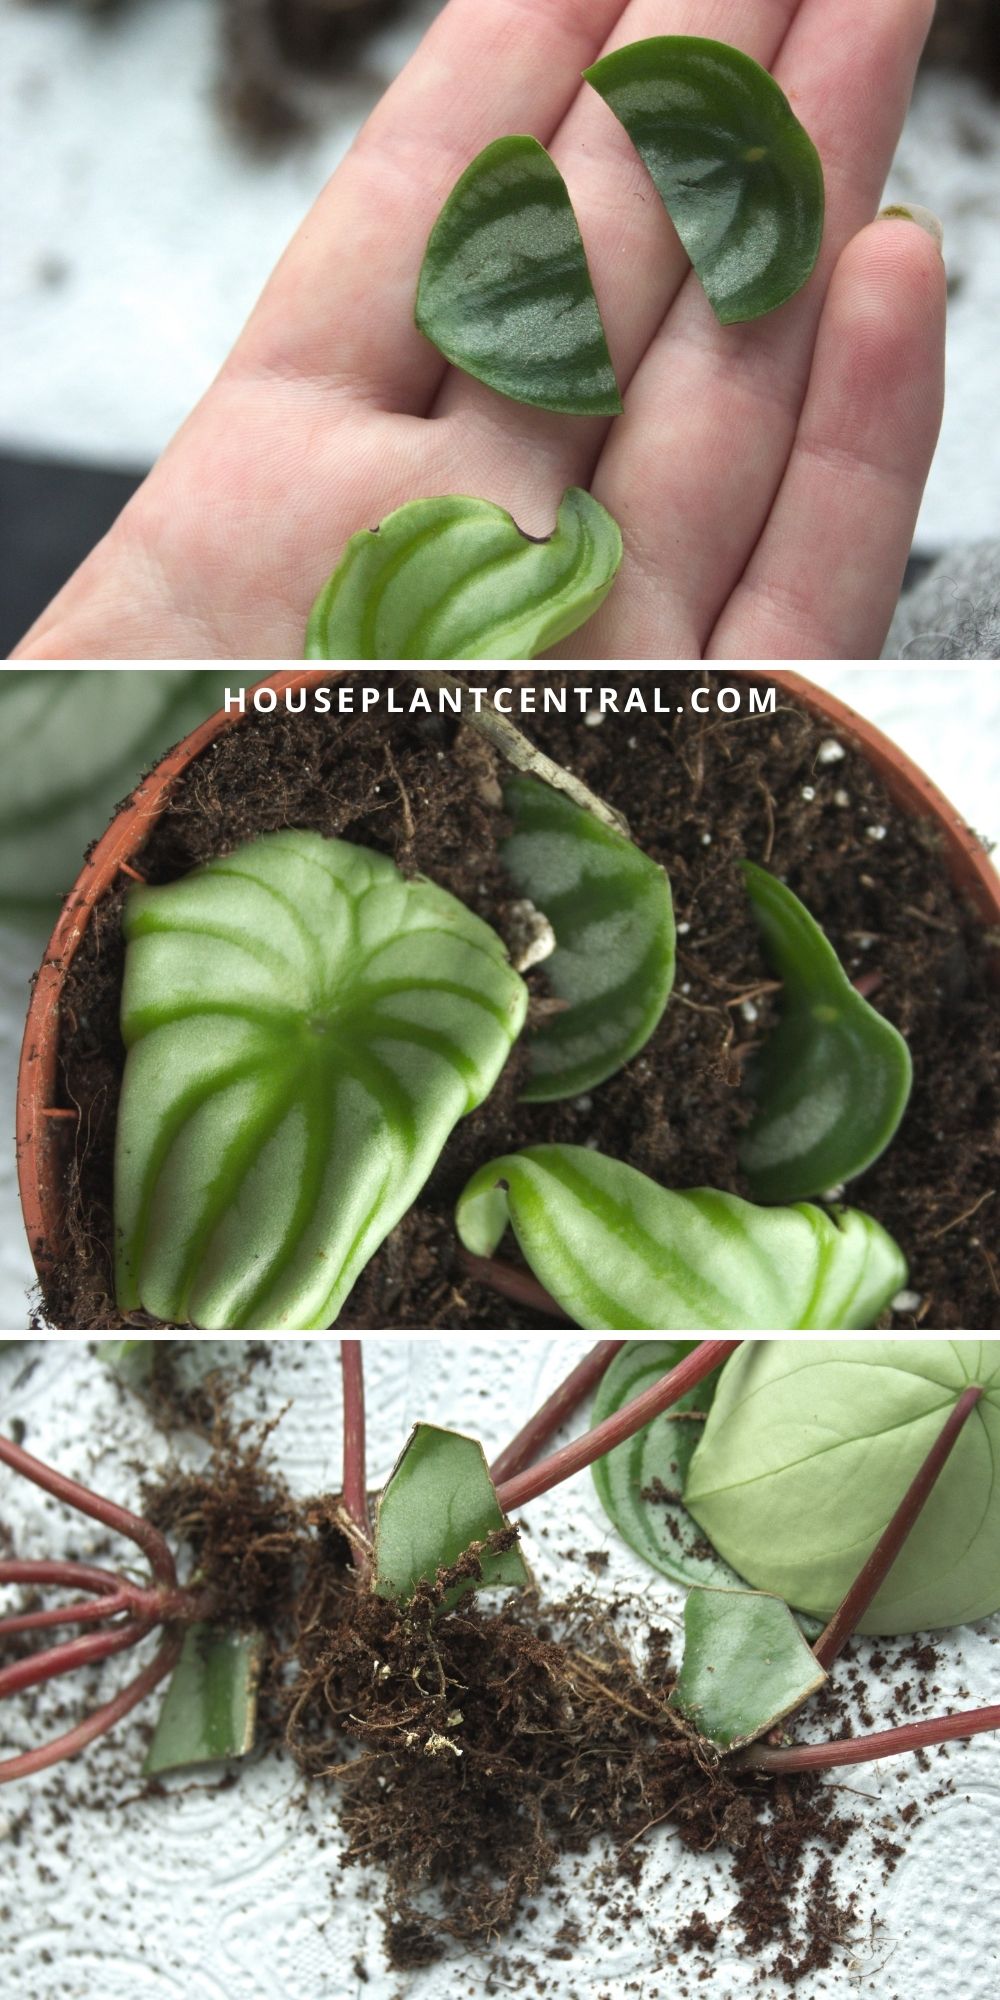 Set of three photos showing propagation of a watermelon Peperomia houseplant.